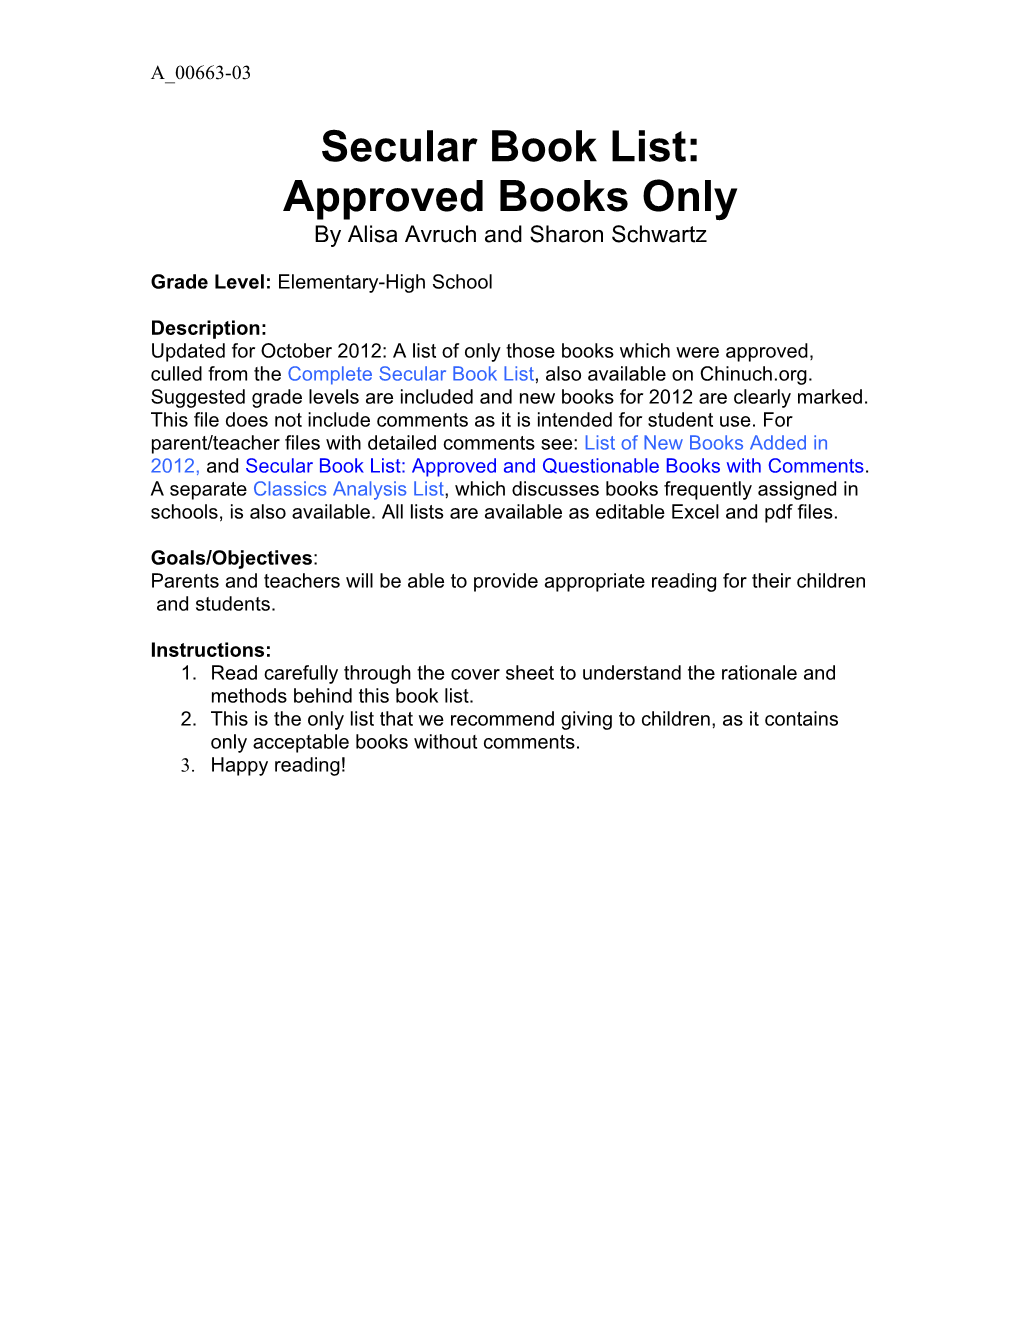 List of Approved Books for Children and Their Parents Updated September 2012